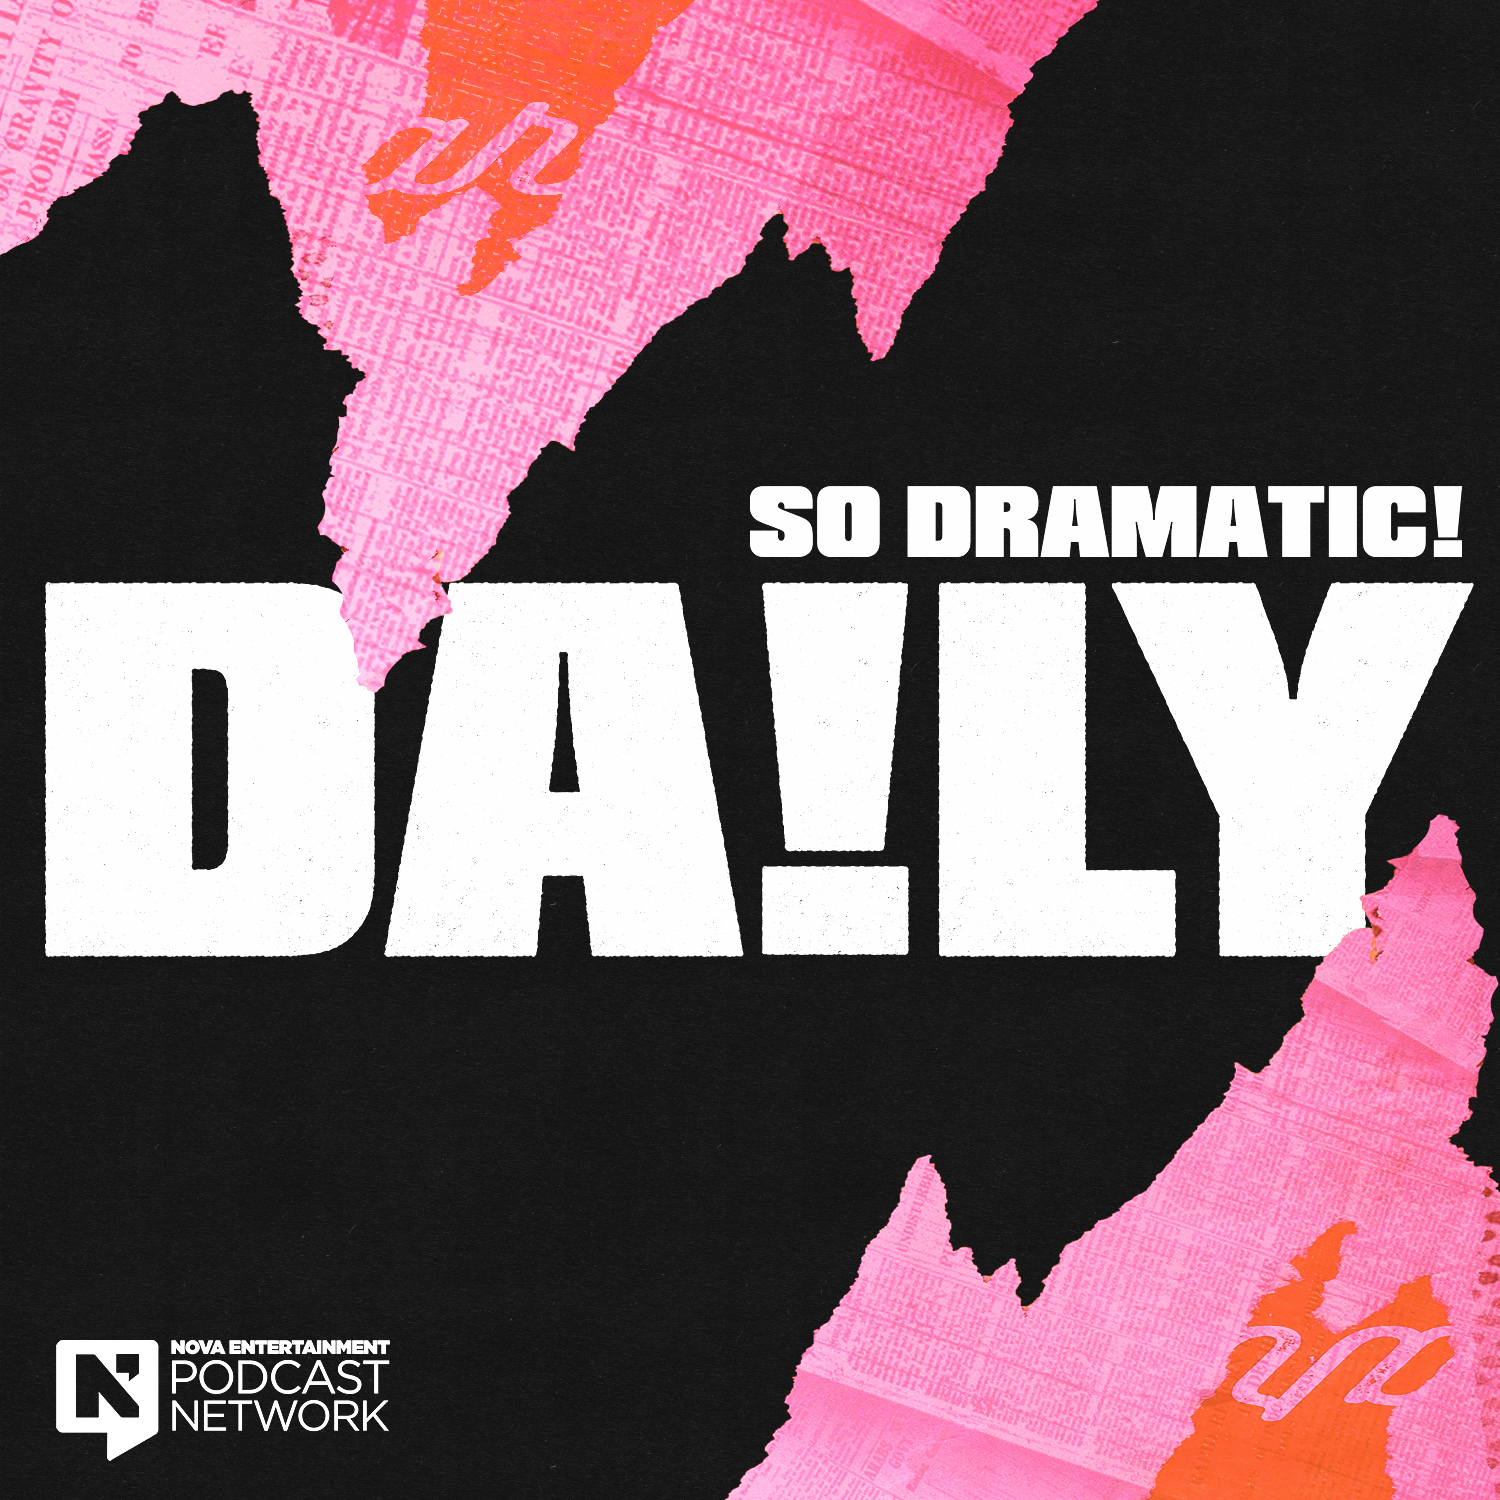 SO DRAMATIC! DAILY HAS MOVED...